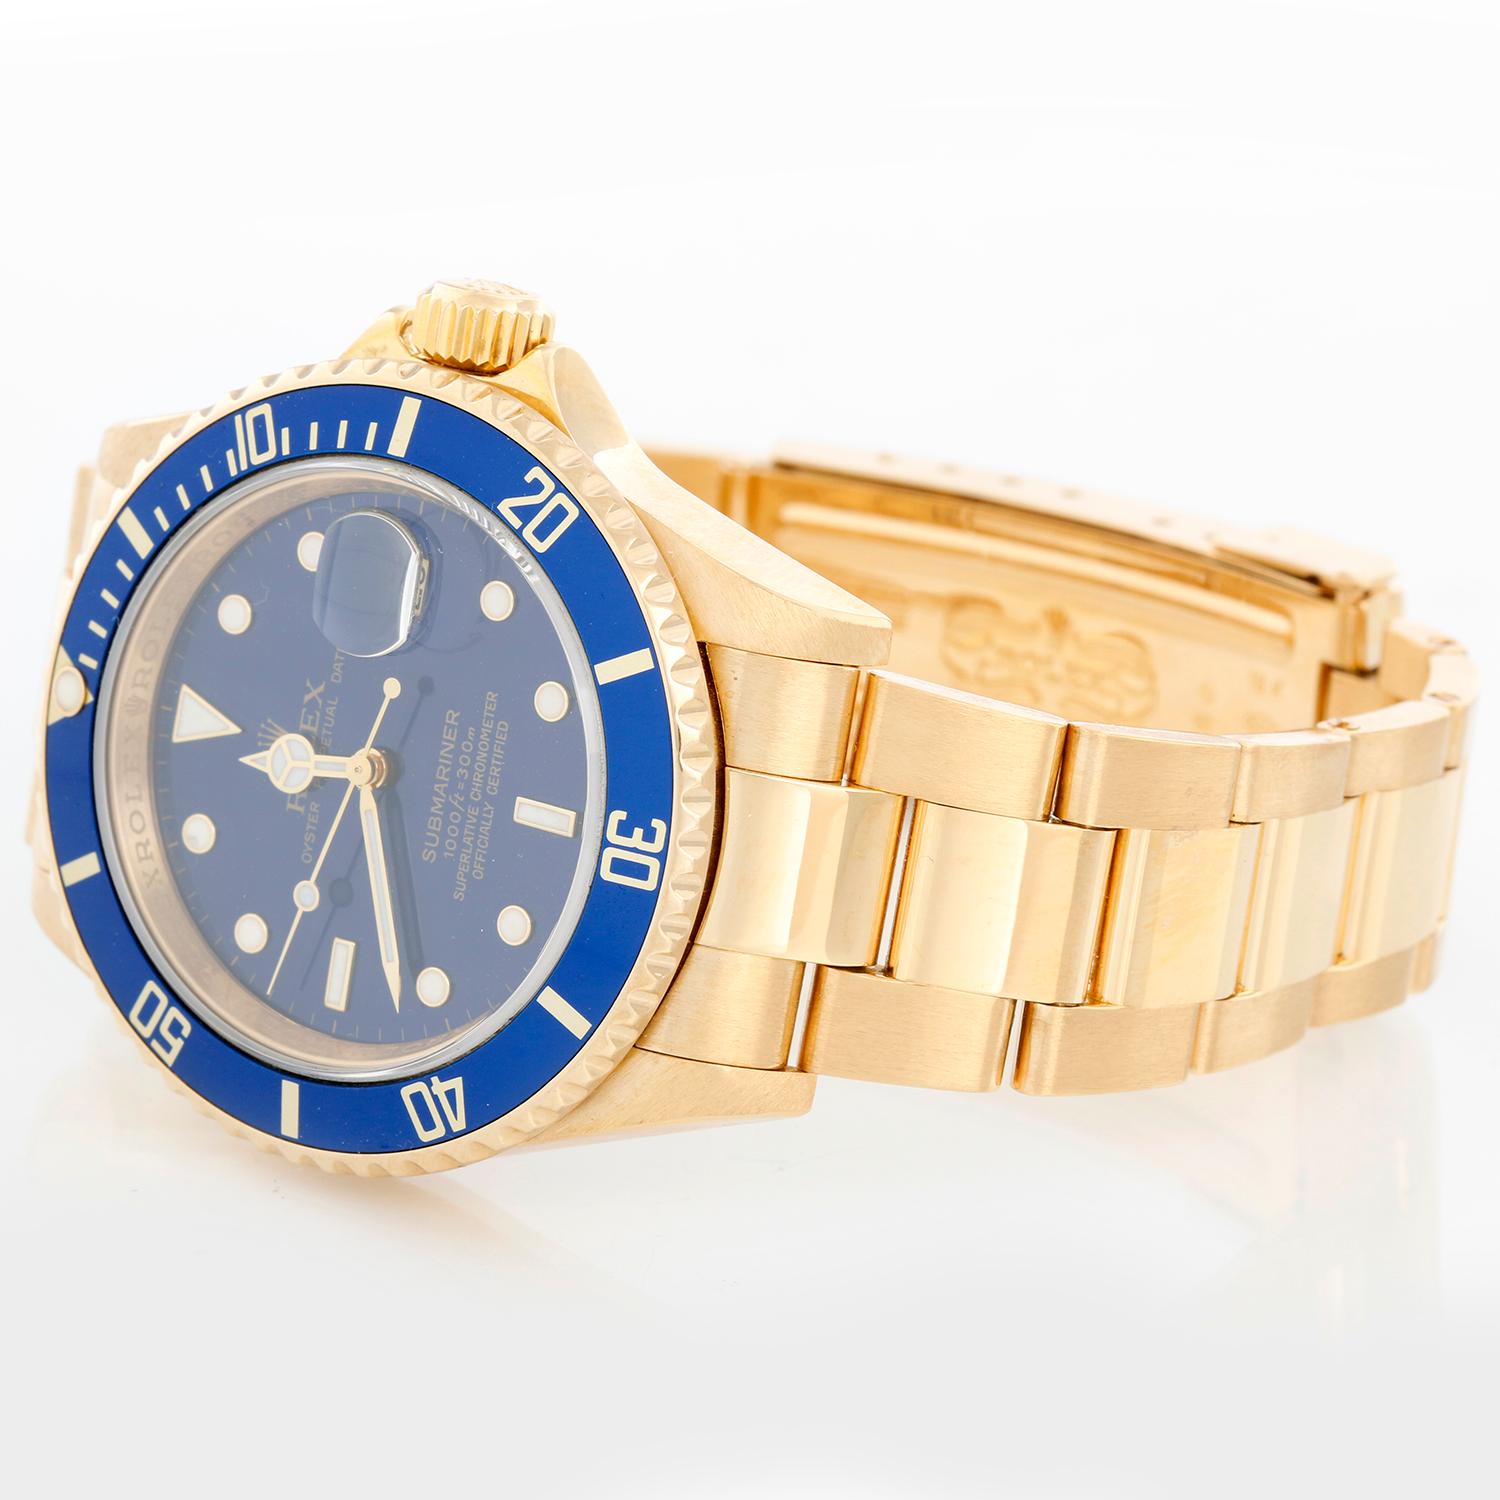 Collectible Rolex Submariner 18k Gold Men's Watch 16618 Blue Dial - Automatic winding, 31 jewels, Quickset, sapphire crystal. 18k yellow gold case with rotating bezel with blue insert (40mm diameter) Inner bezel engraving . Blue dial. 18k yellow